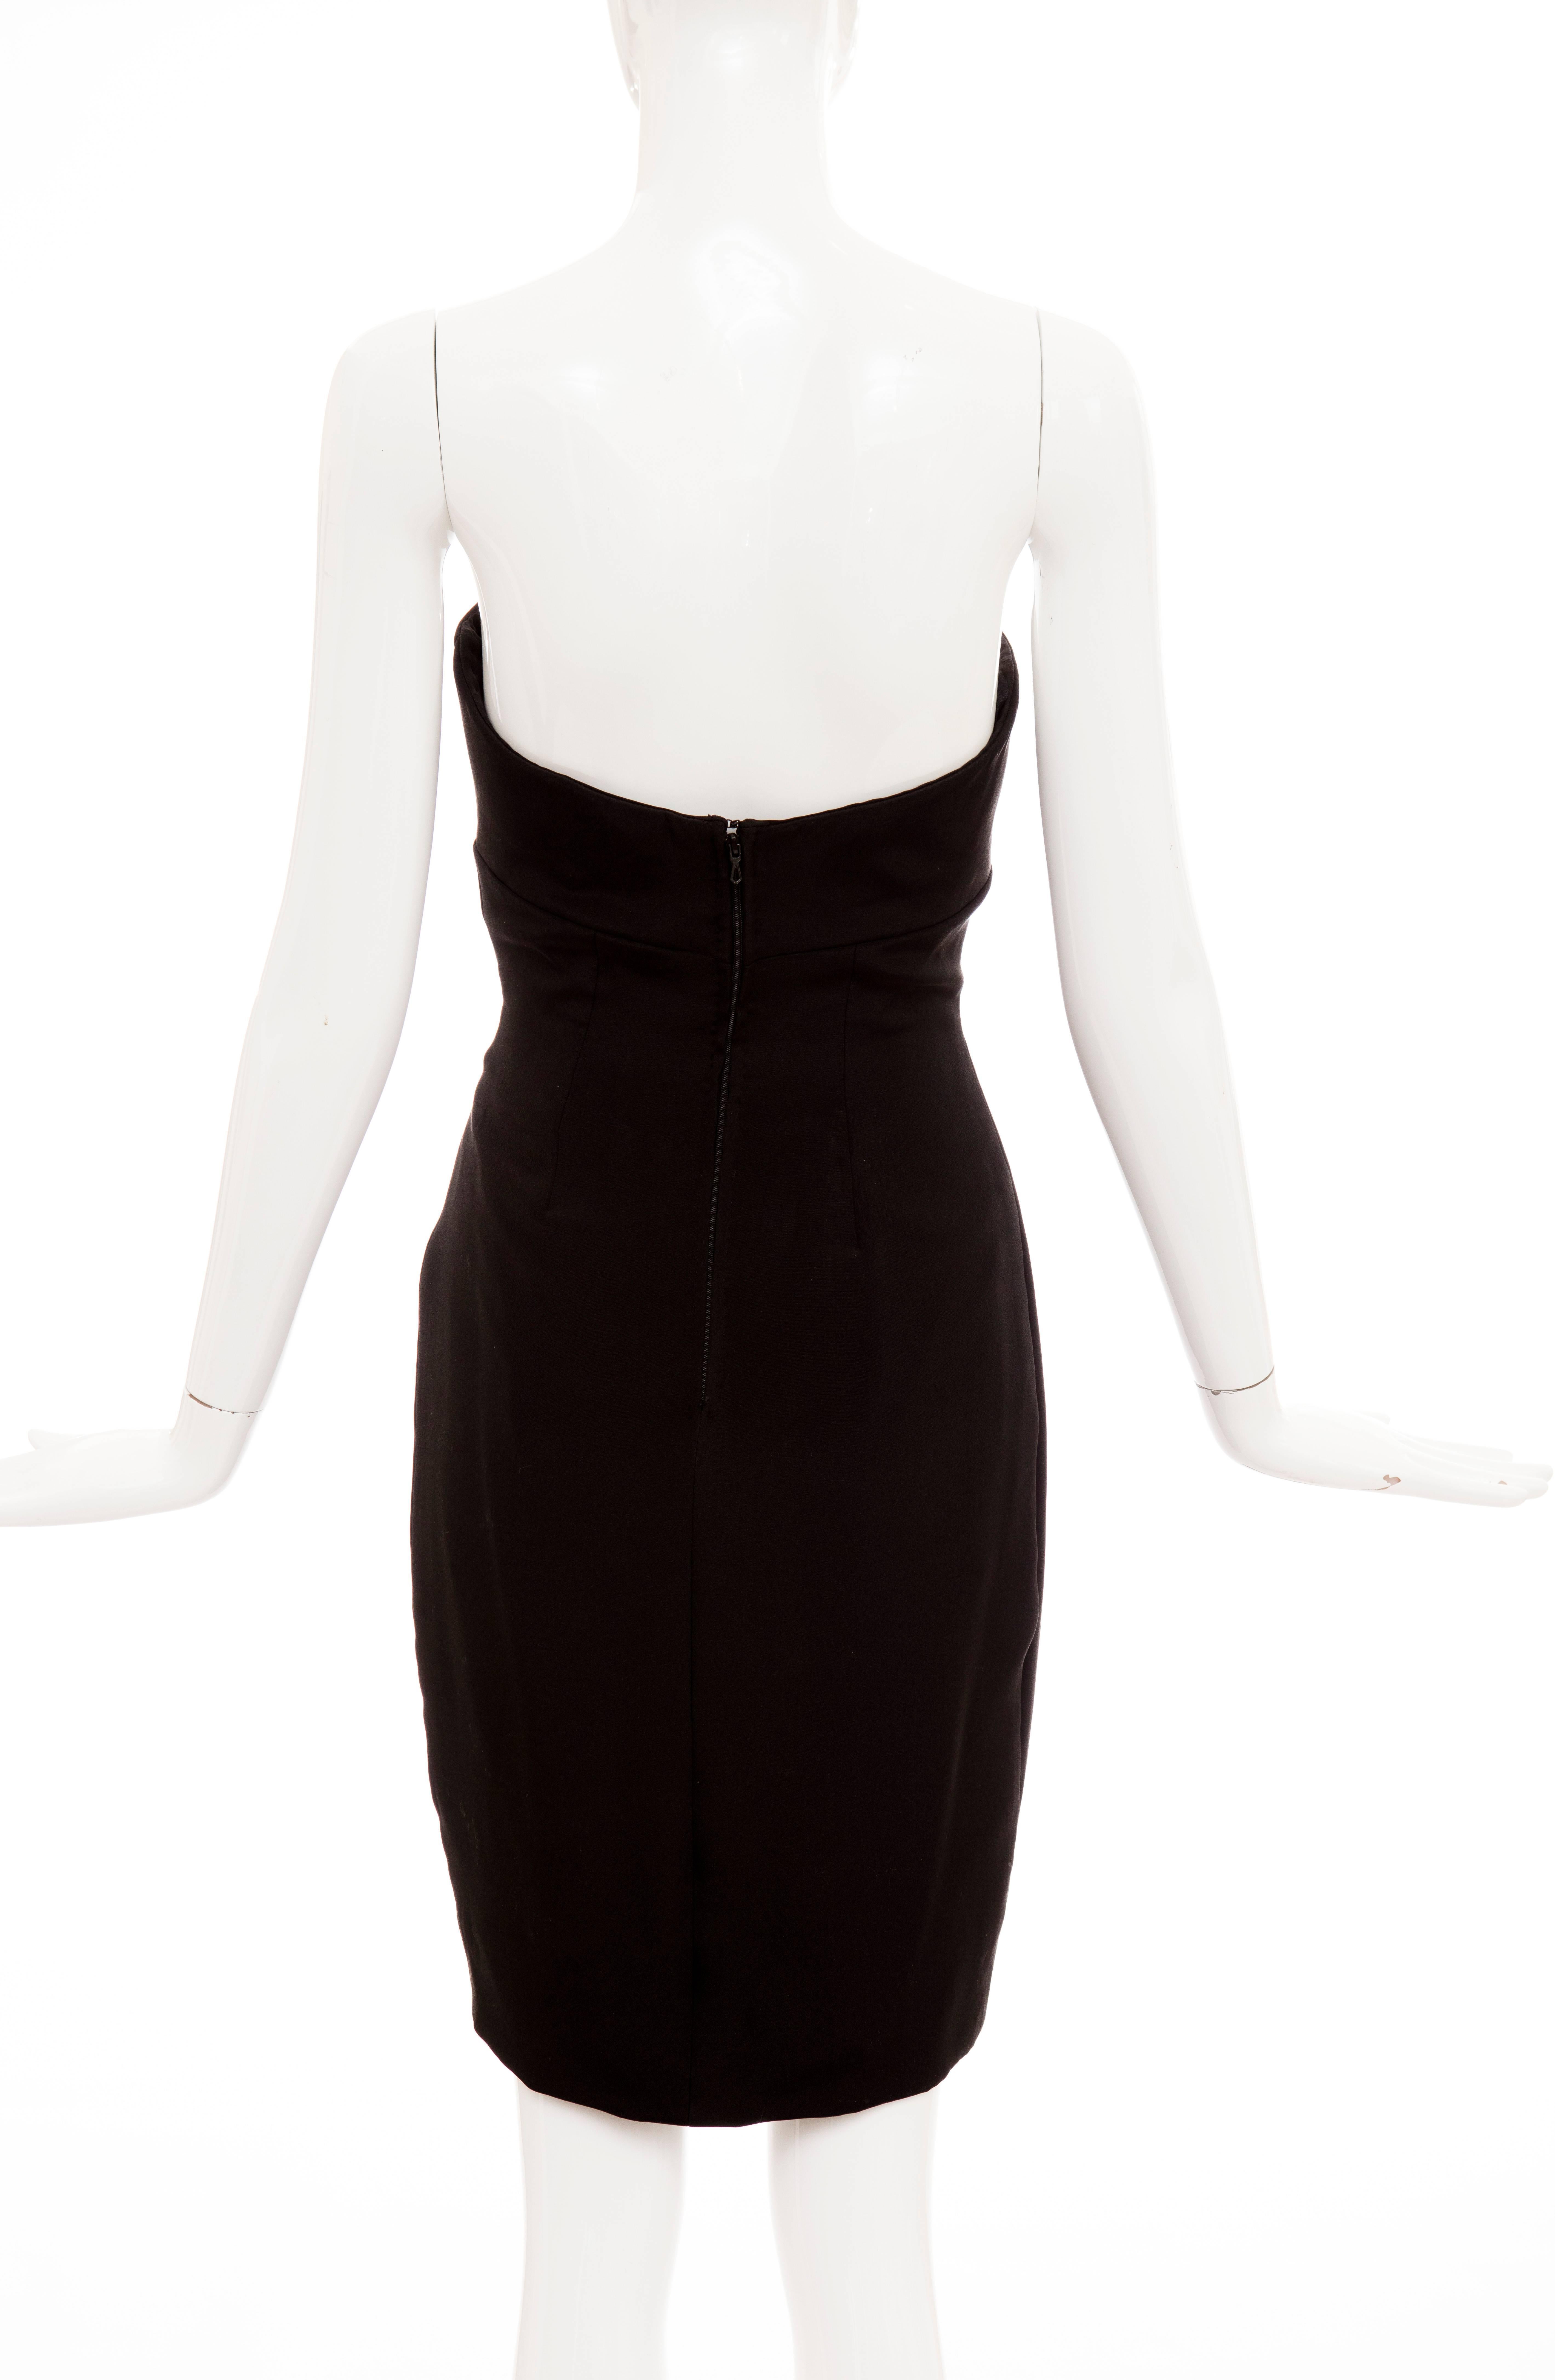 Women's Vicky Tiel Couture Black Silk Strapless Dress, Circa 1980's For Sale